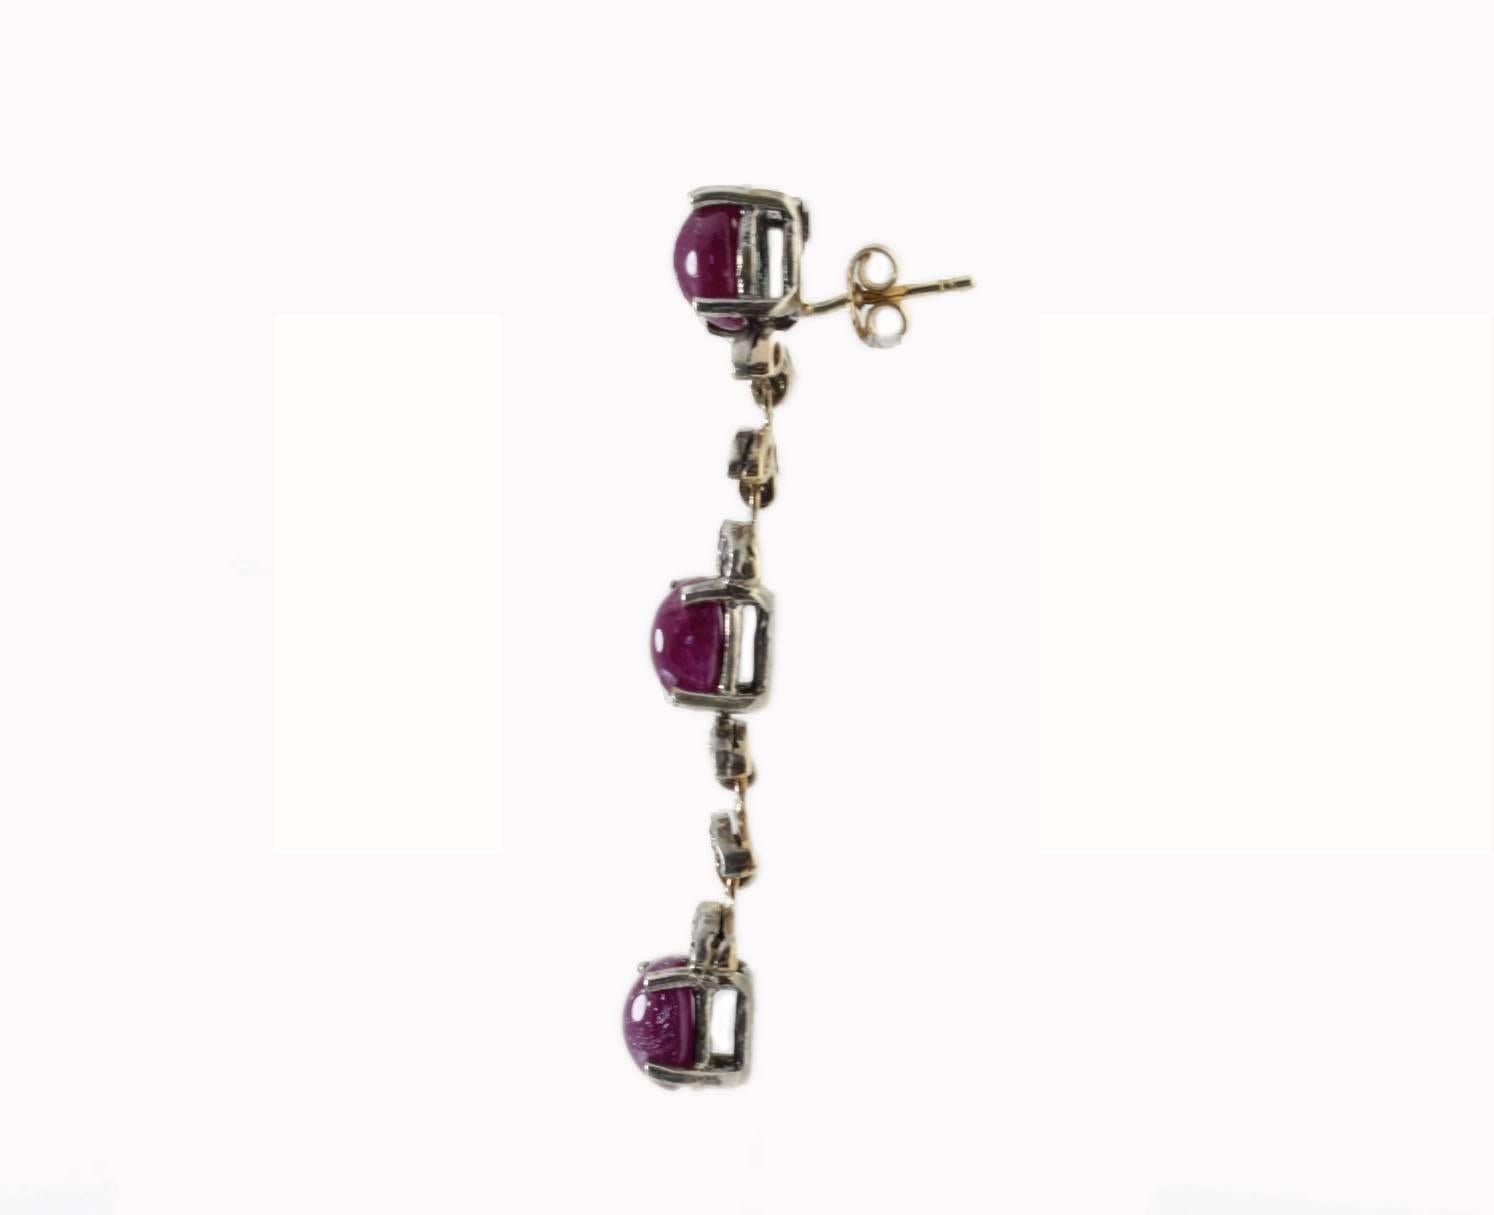 Retro Diamonds and Cabochon Cut Rubies Dangle Rose Gold End Silver Earrings